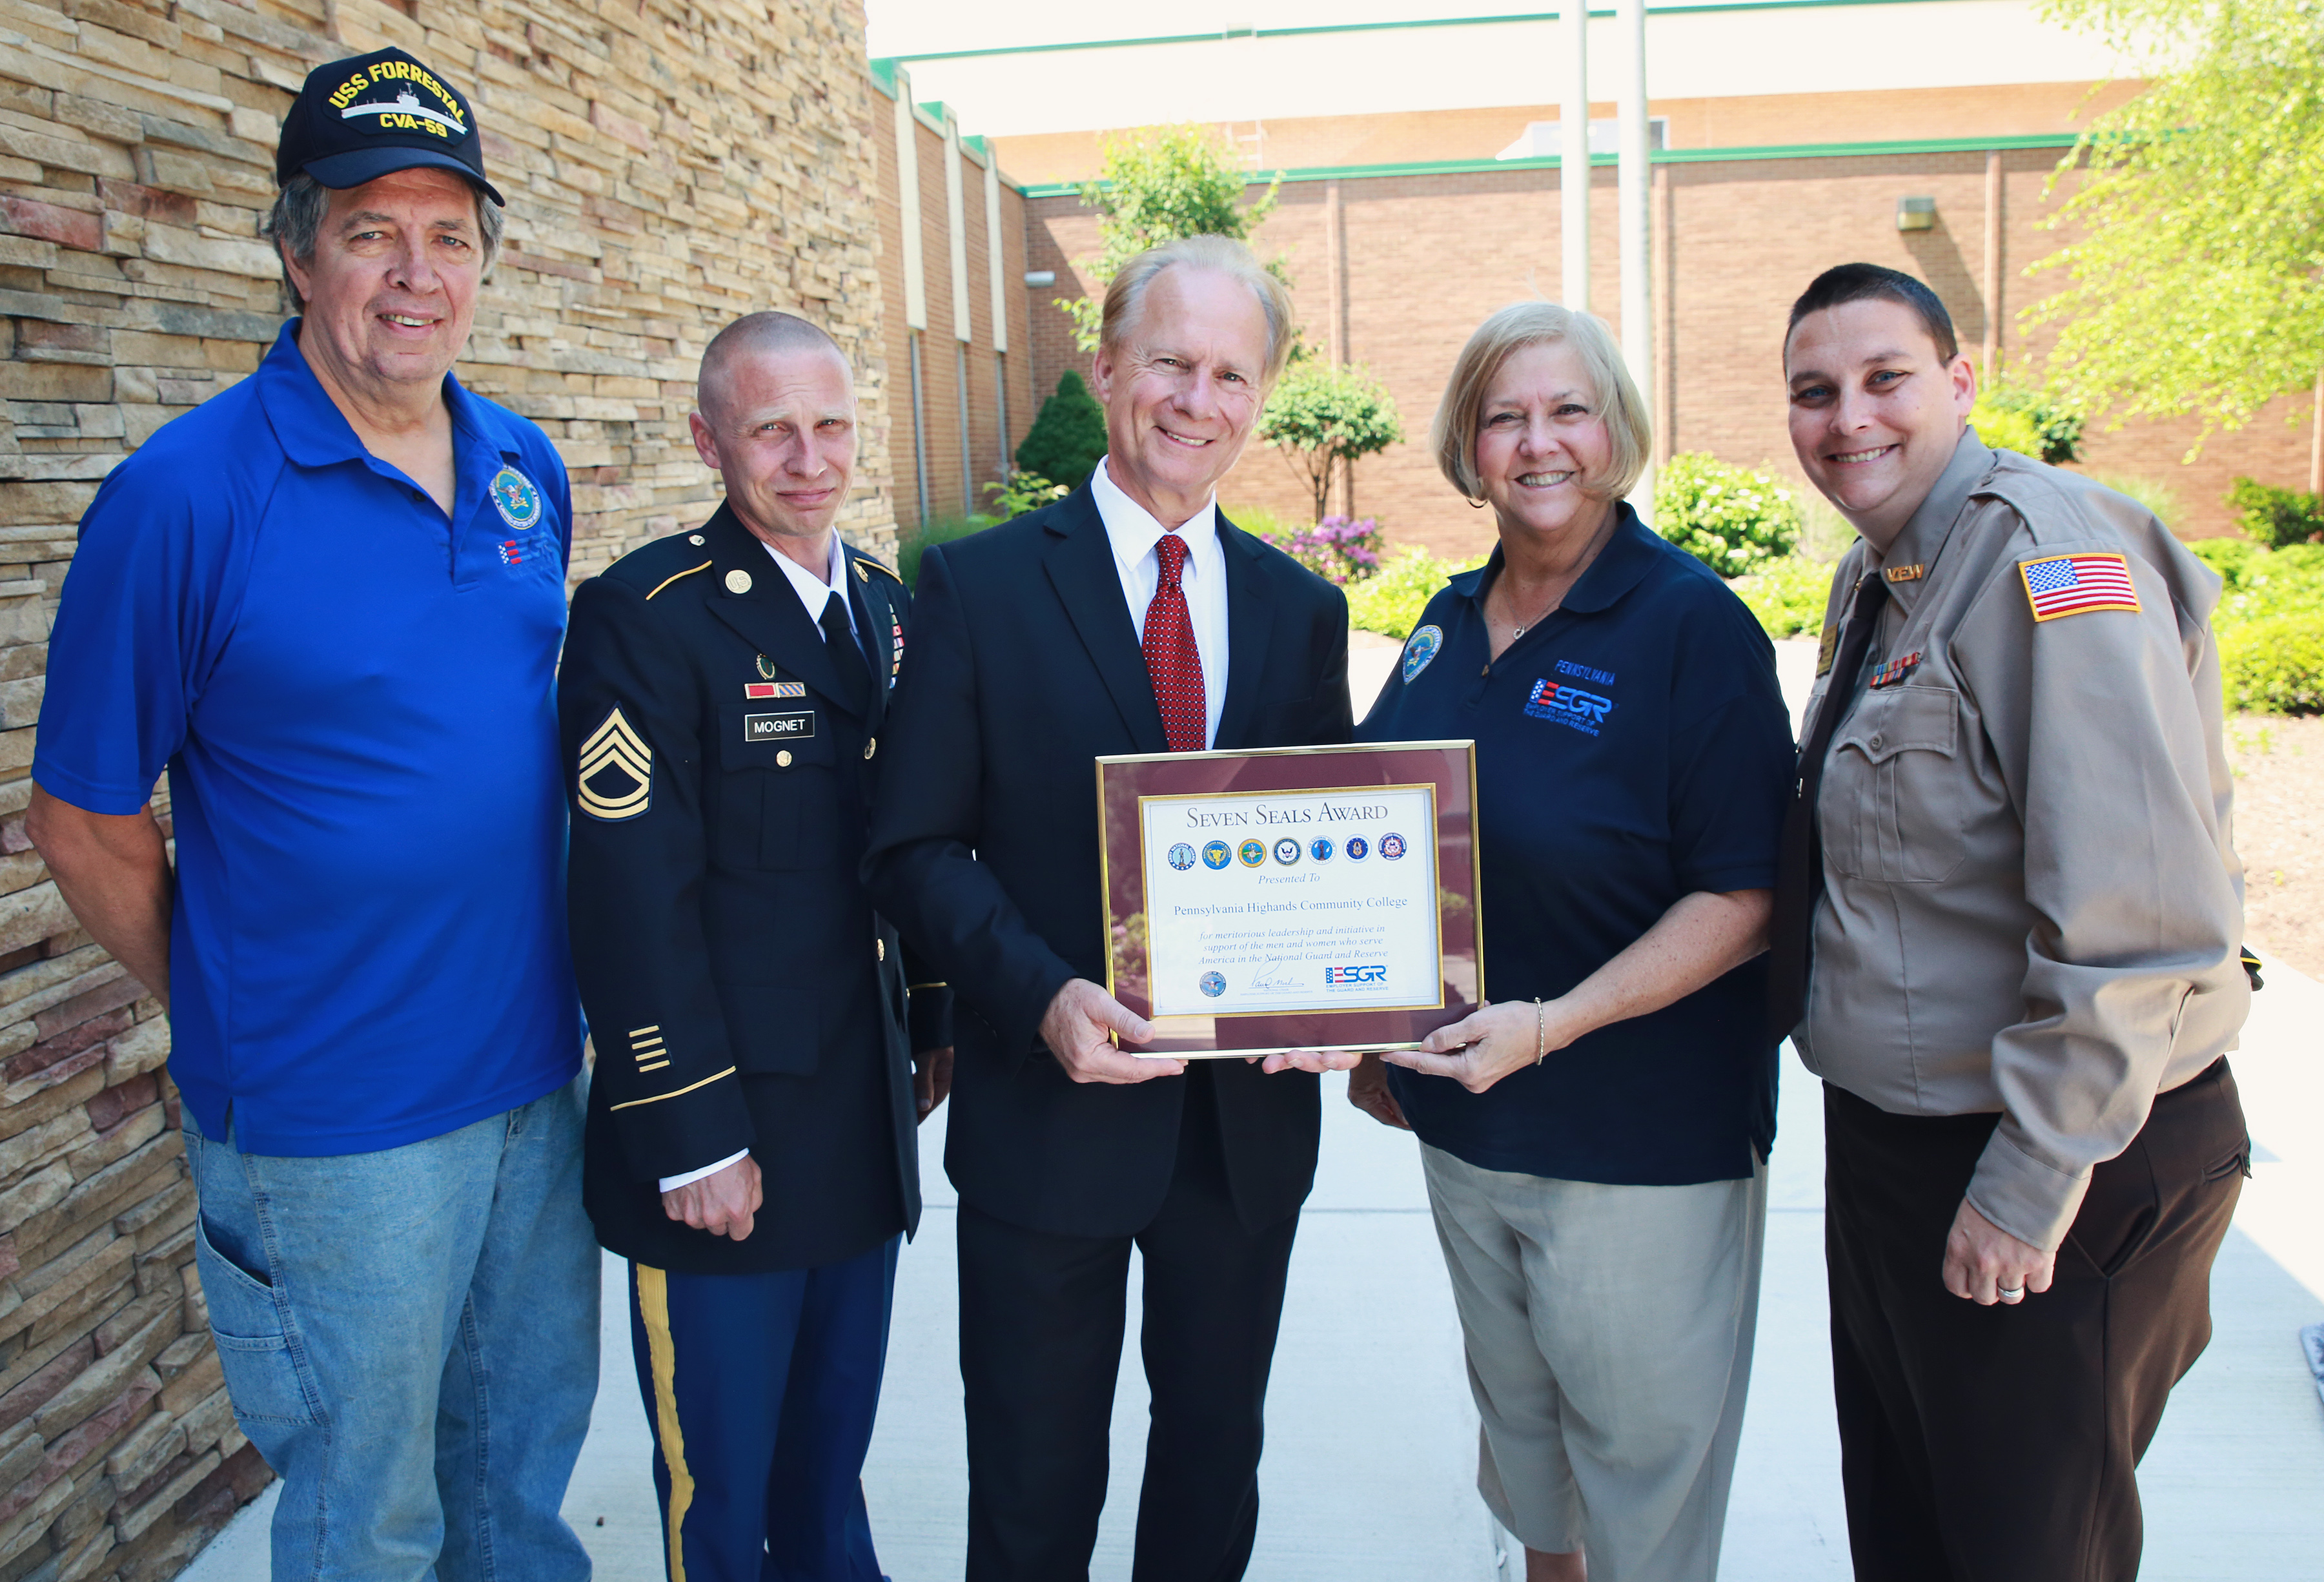 Photo is of the Seven Seals Award presentation. Pictured from left to right: Greg Simmons, ESGR volunteer; Scott Mognet, student and retired from the PA Army National Guard; Dr. Walter Asonevich, College President; Polly Simmons, ESGR volunteer; and Chris Schuerch, student and Windber VFW Post 4795 member.